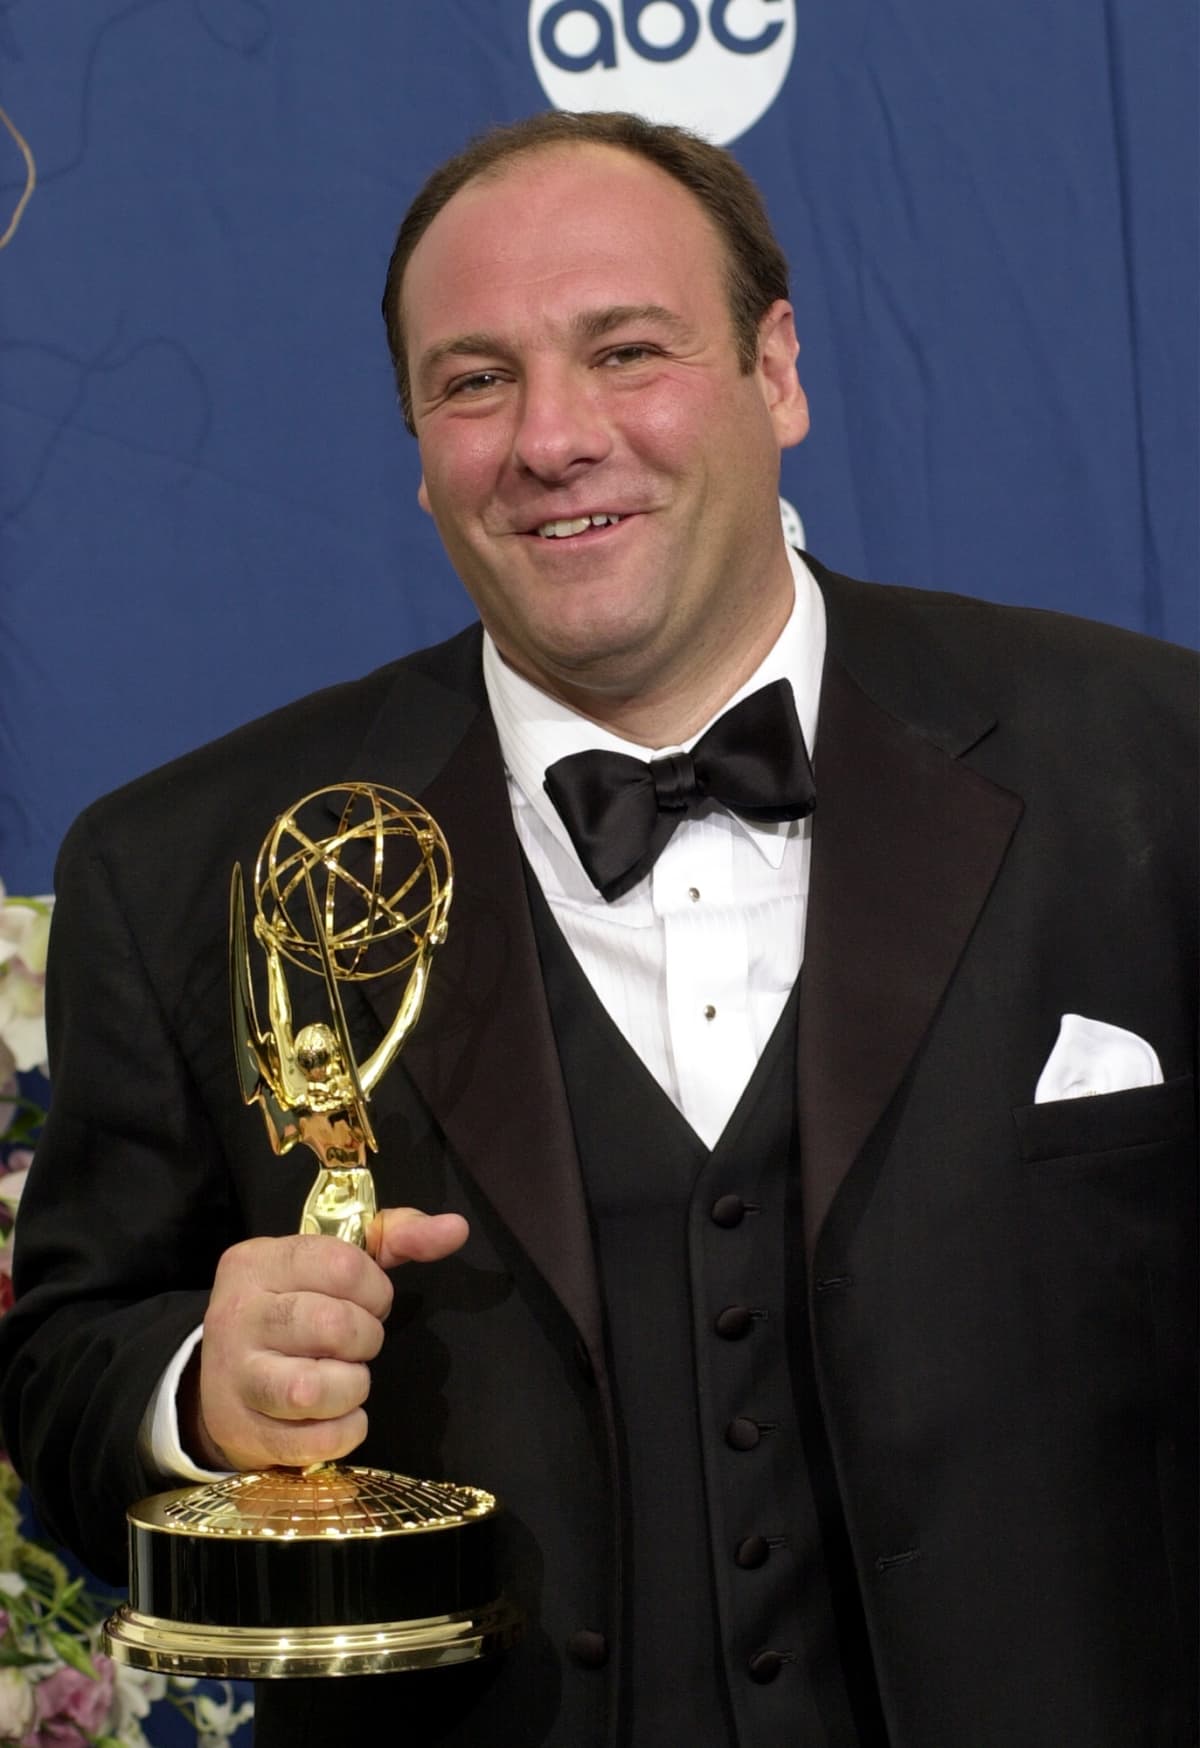 377855 20: Actor James Gandolfini holds his award for Outstanding Lead Actor in a Drama Series backstage at the 52nd Annual Emmy Awards, September 10, 2000 in Los Angeles, CA. (Photo by David McNew/Newsmakers)